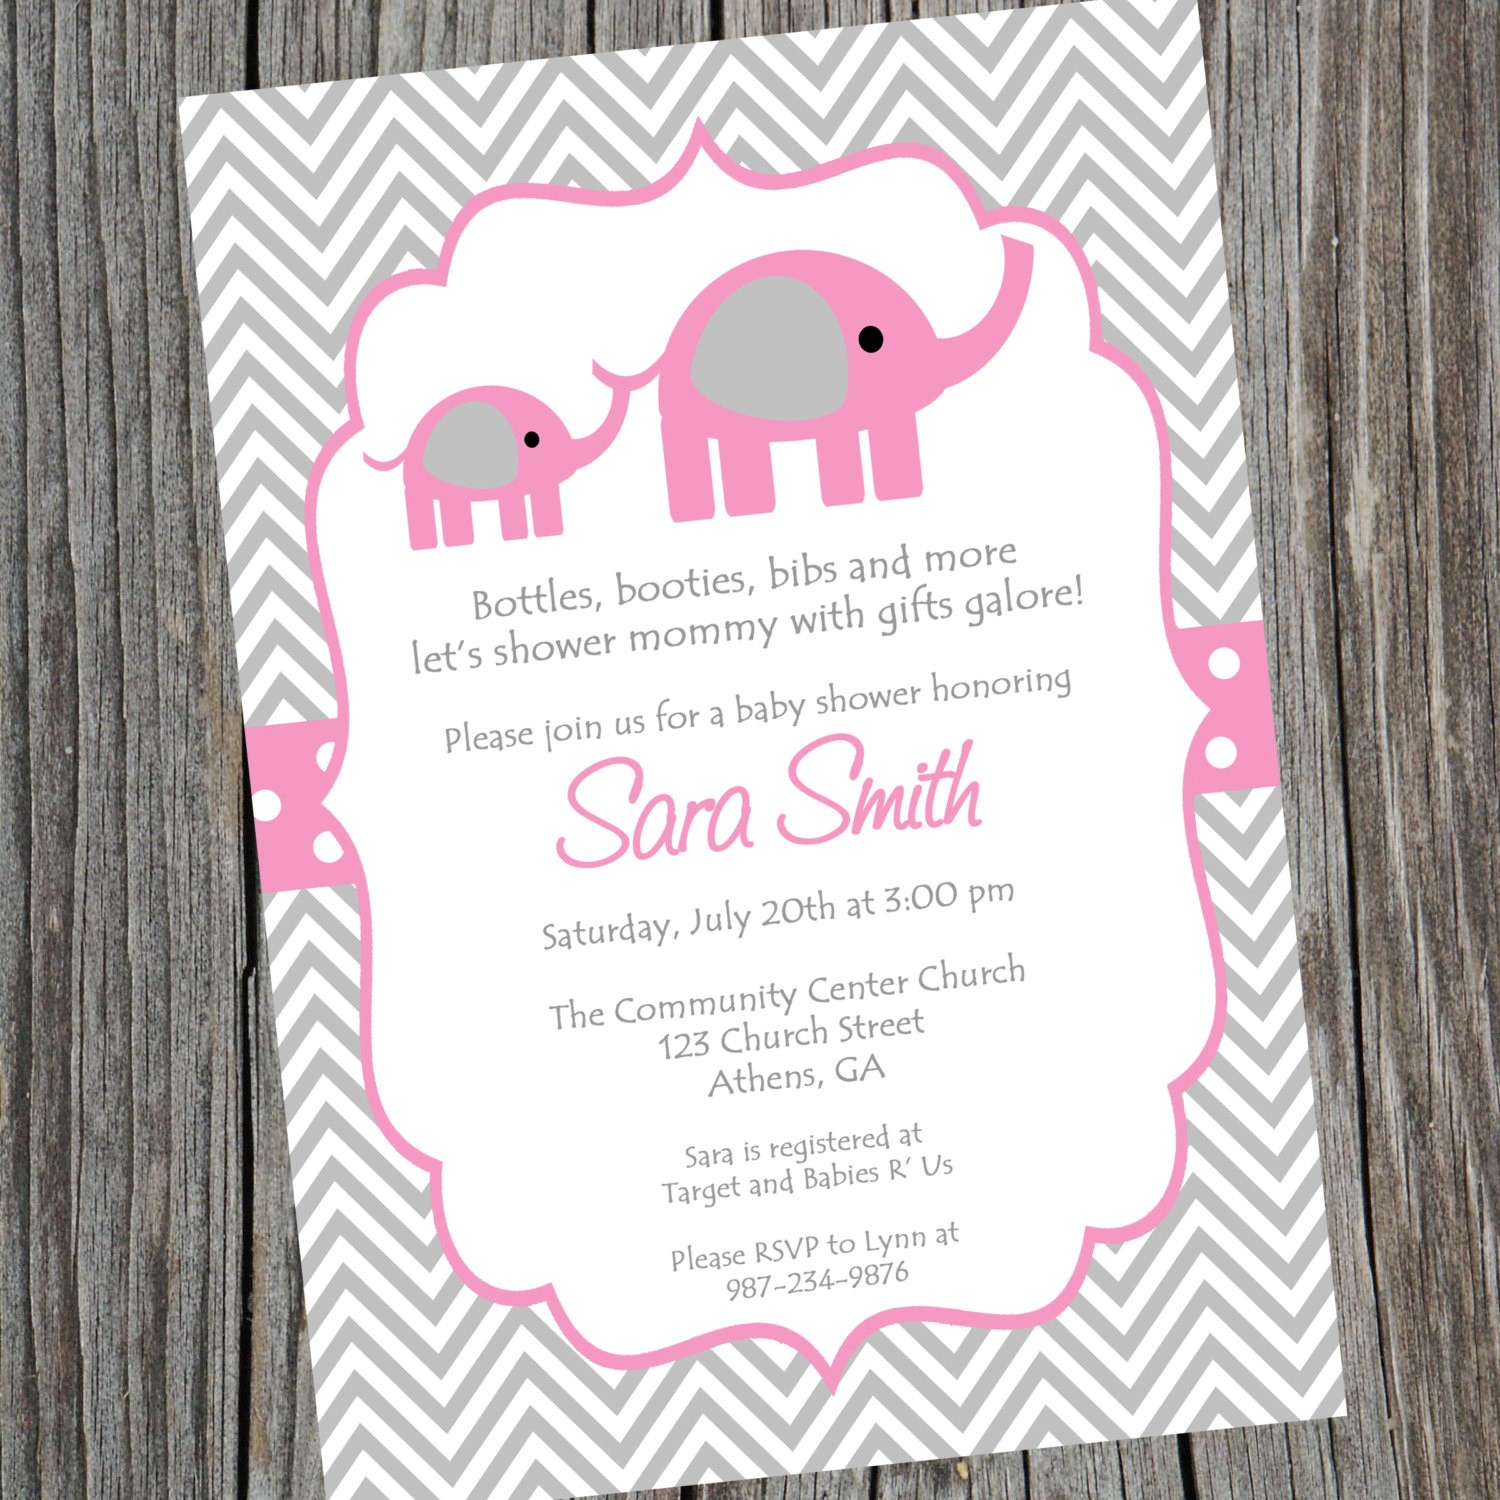 Full Size of Baby Shower:inspirational Elephant Baby Shower Invitations Photo Concepts Elephant Baby Shower Invitations Invitation For Baby Shower Fascinating Pink And Grey Elephant Baby